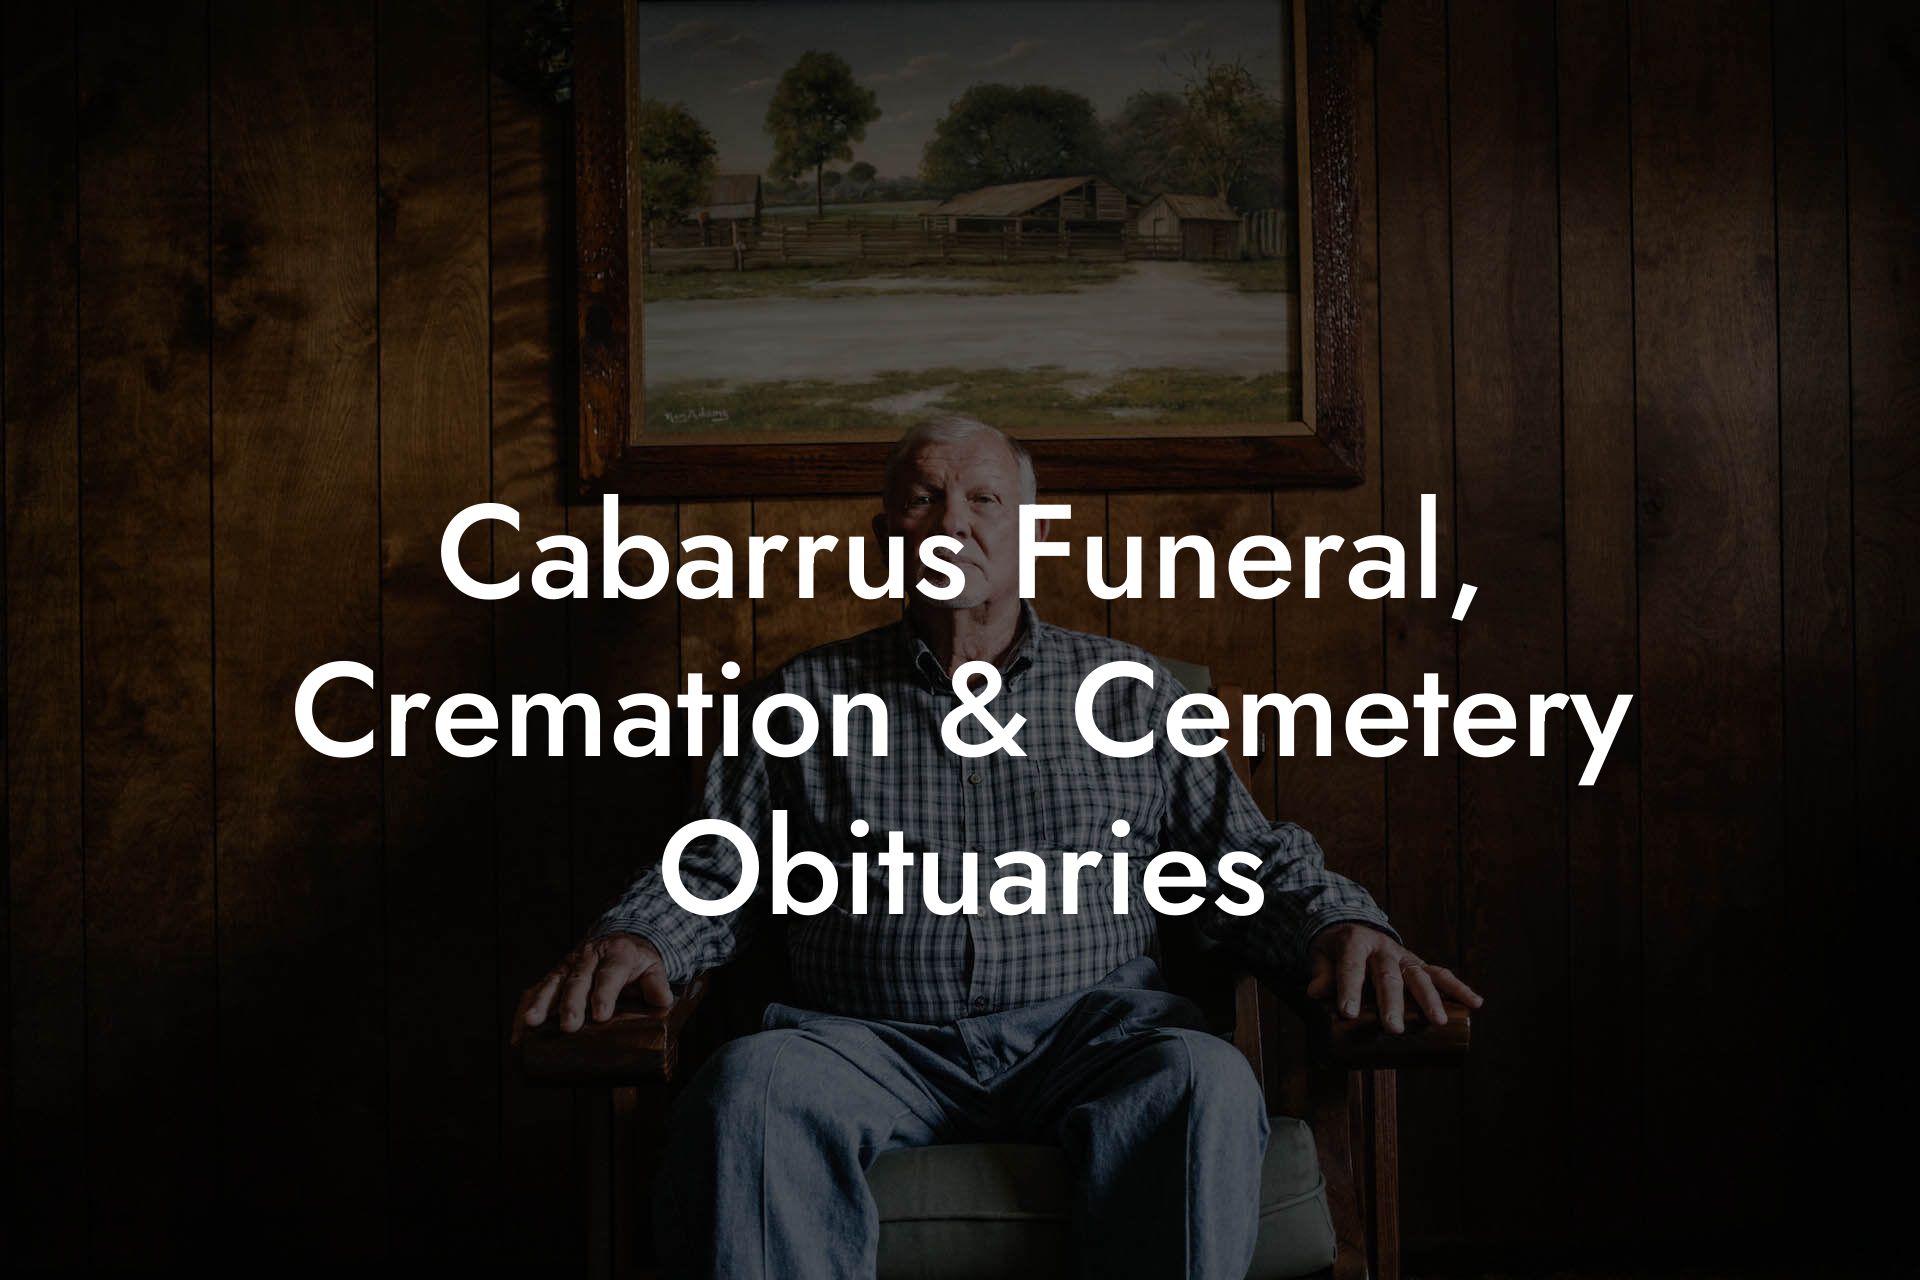 Cabarrus Funeral, Cremation & Cemetery Obituaries